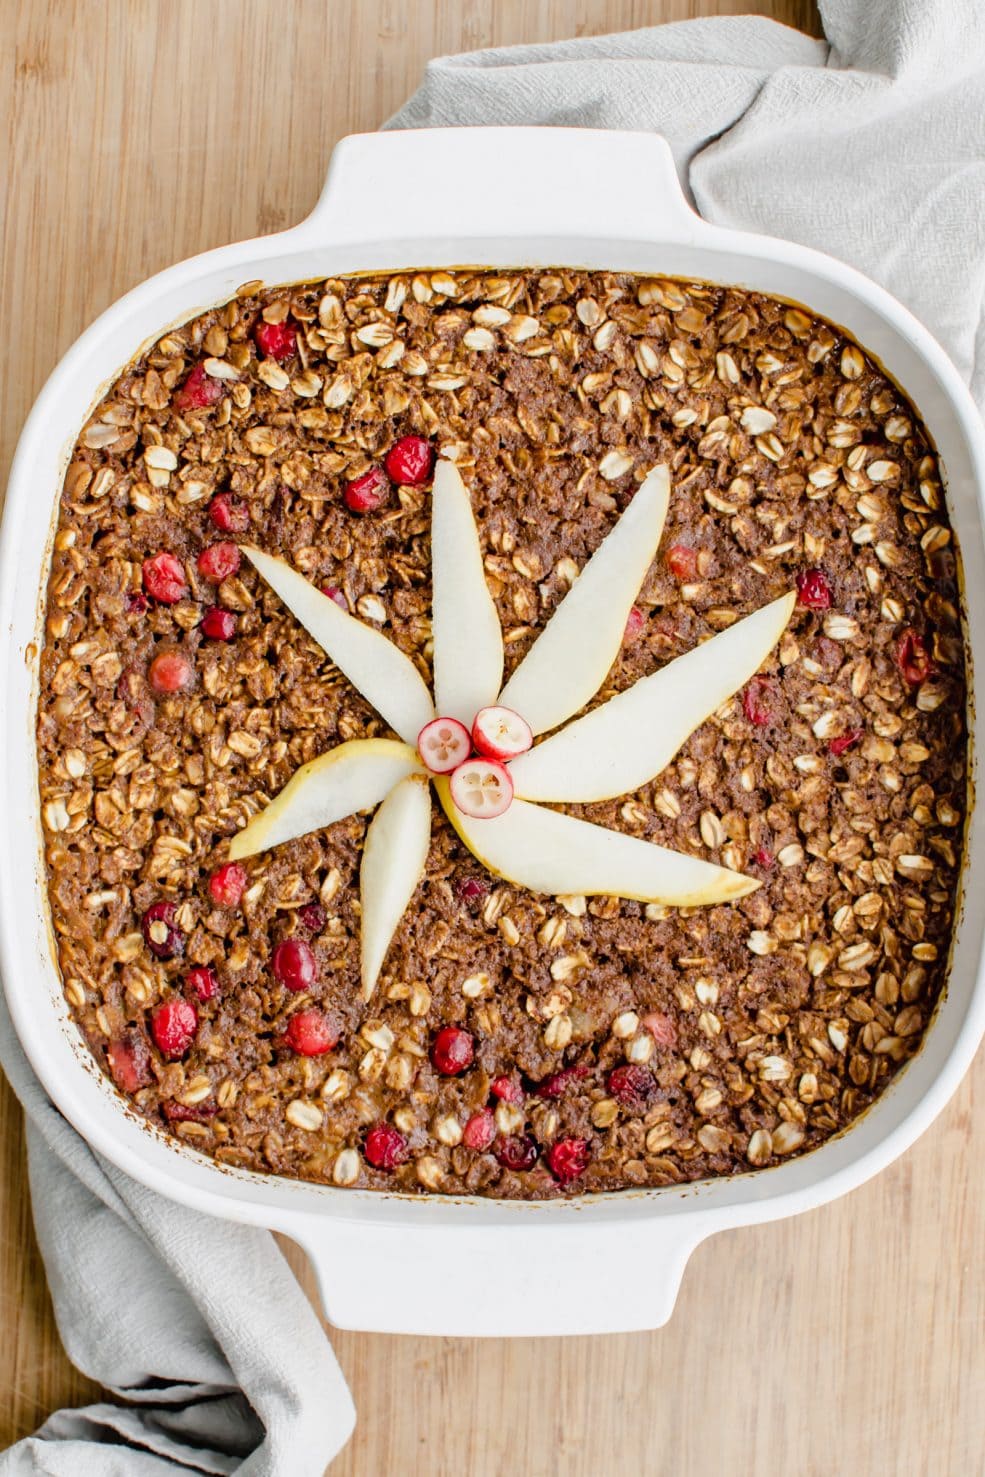 A white casserole dish filled with gingerbread baked oatmeal and topped with pear slices.